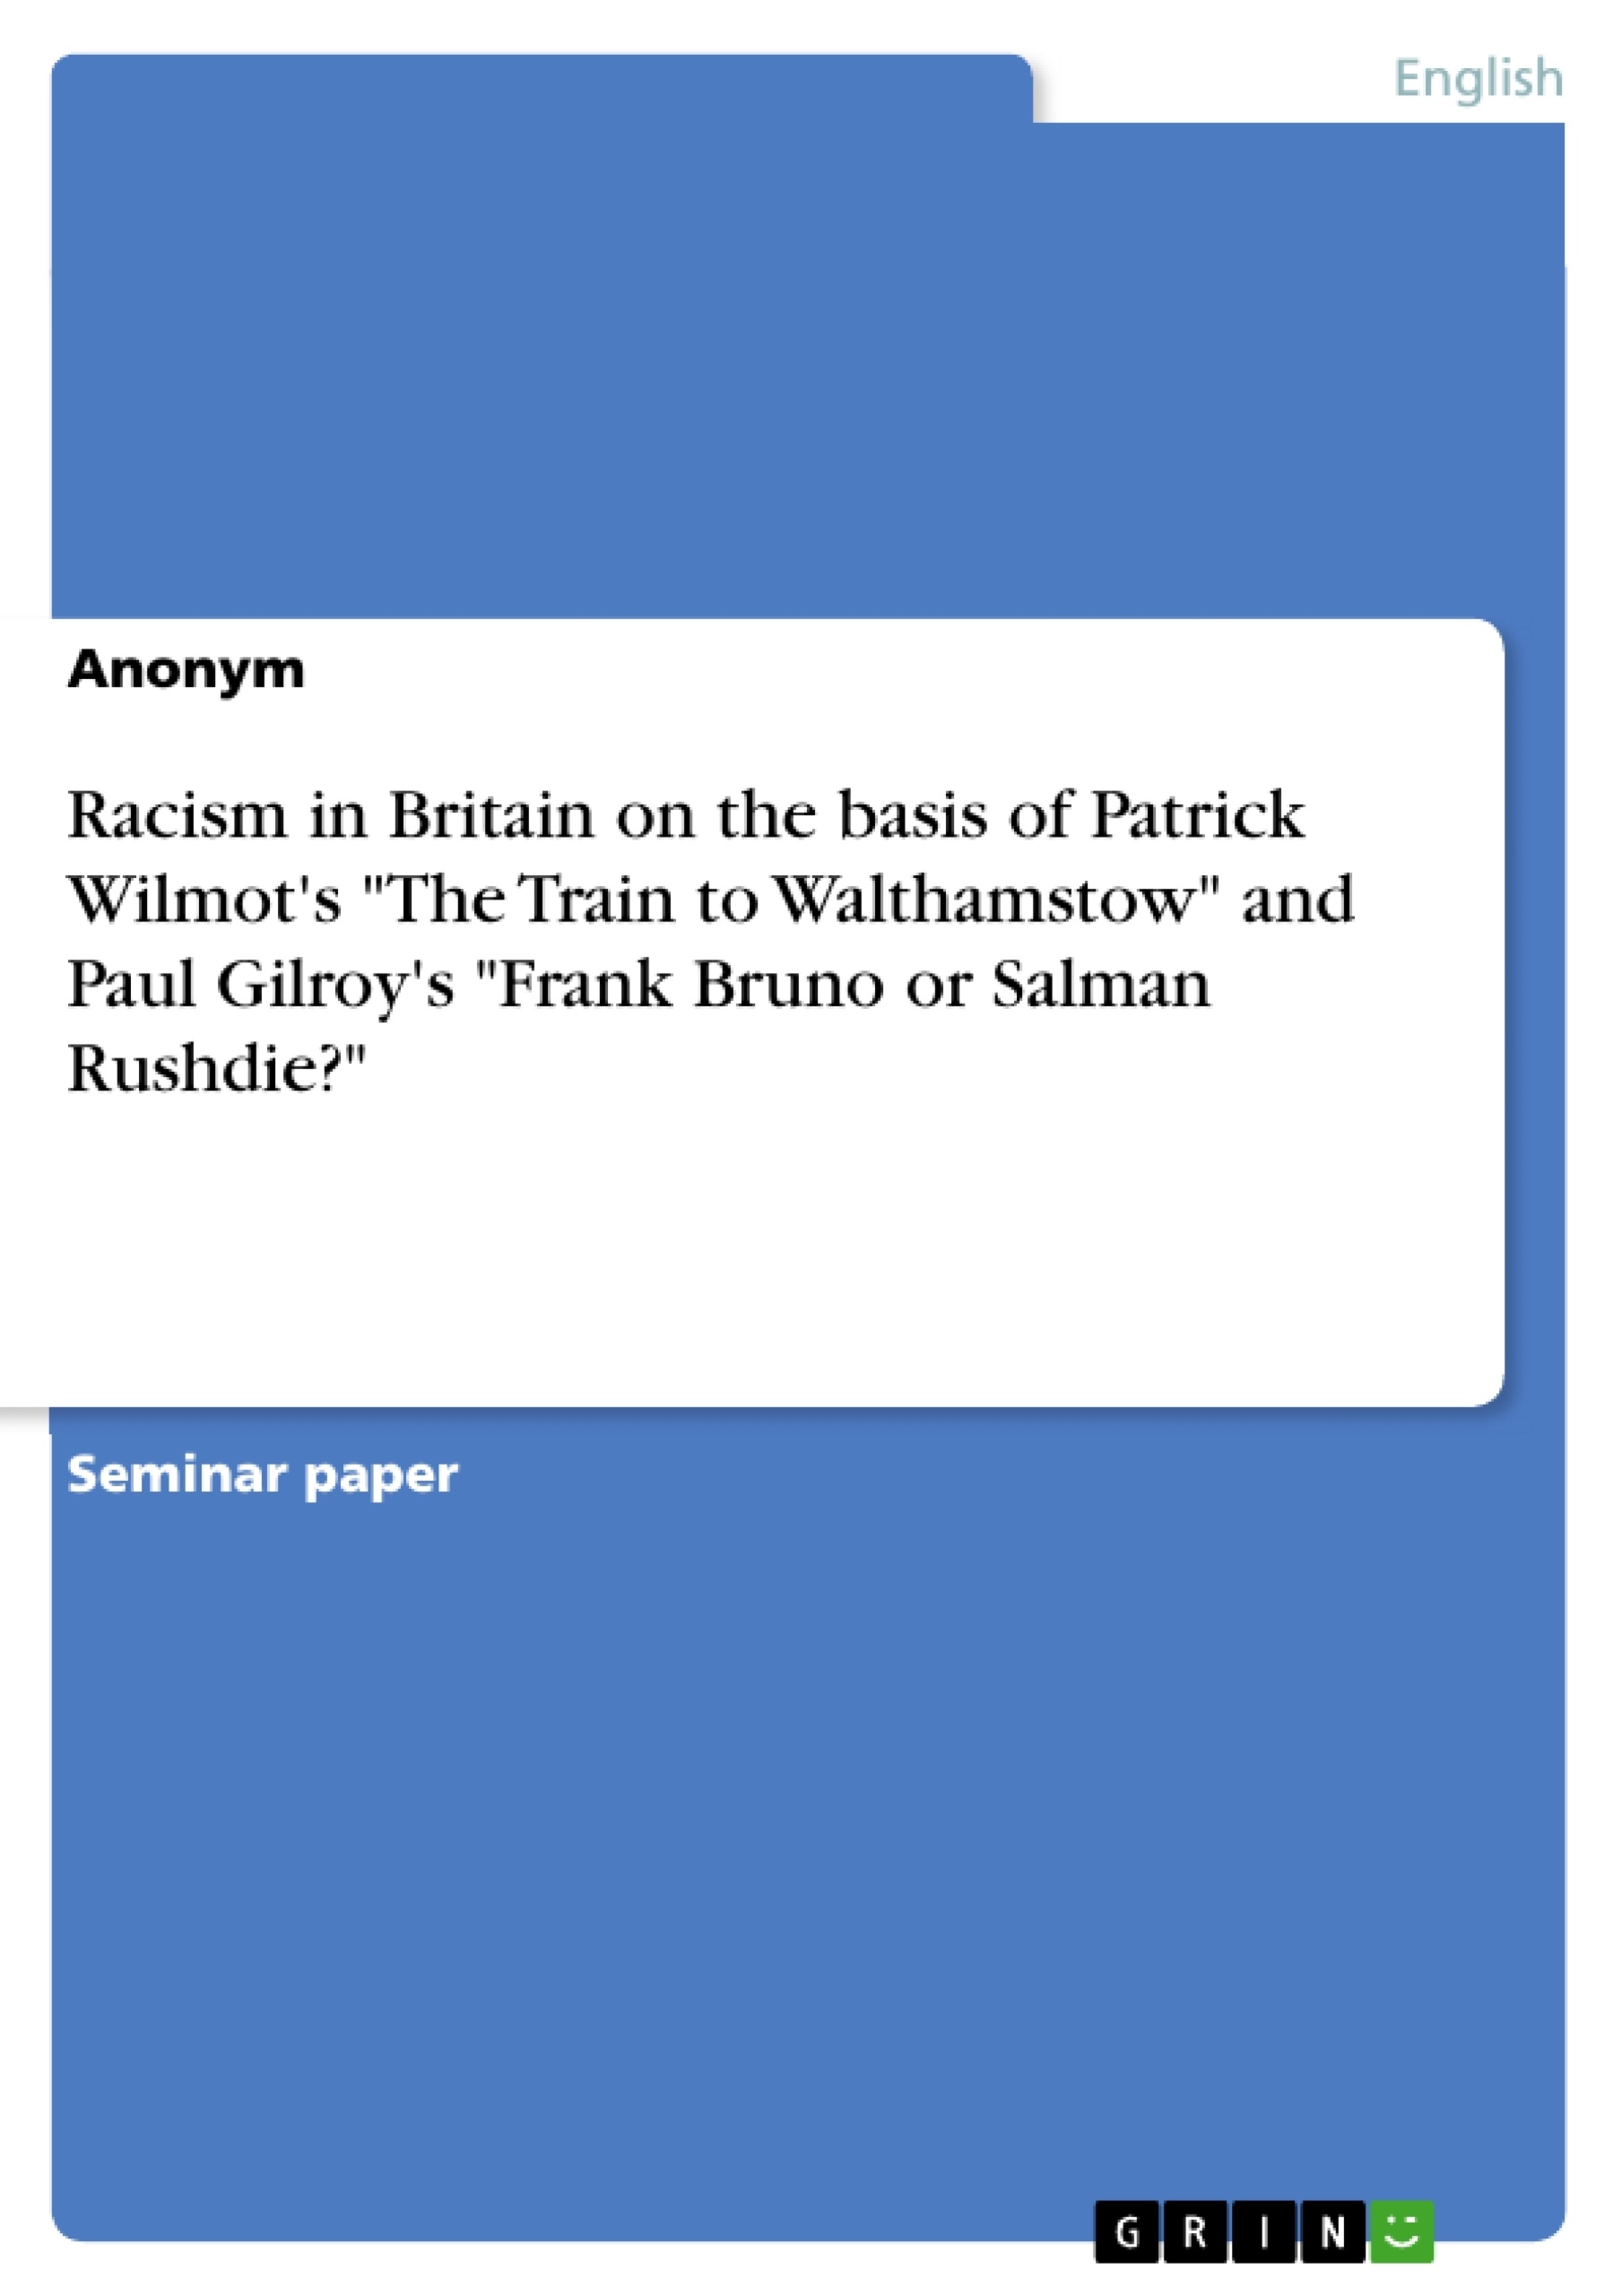 Title: Racism in Britain on the basis of Patrick Wilmot's "The Train to Walthamstow" and Paul Gilroy's "Frank Bruno or Salman Rushdie?"